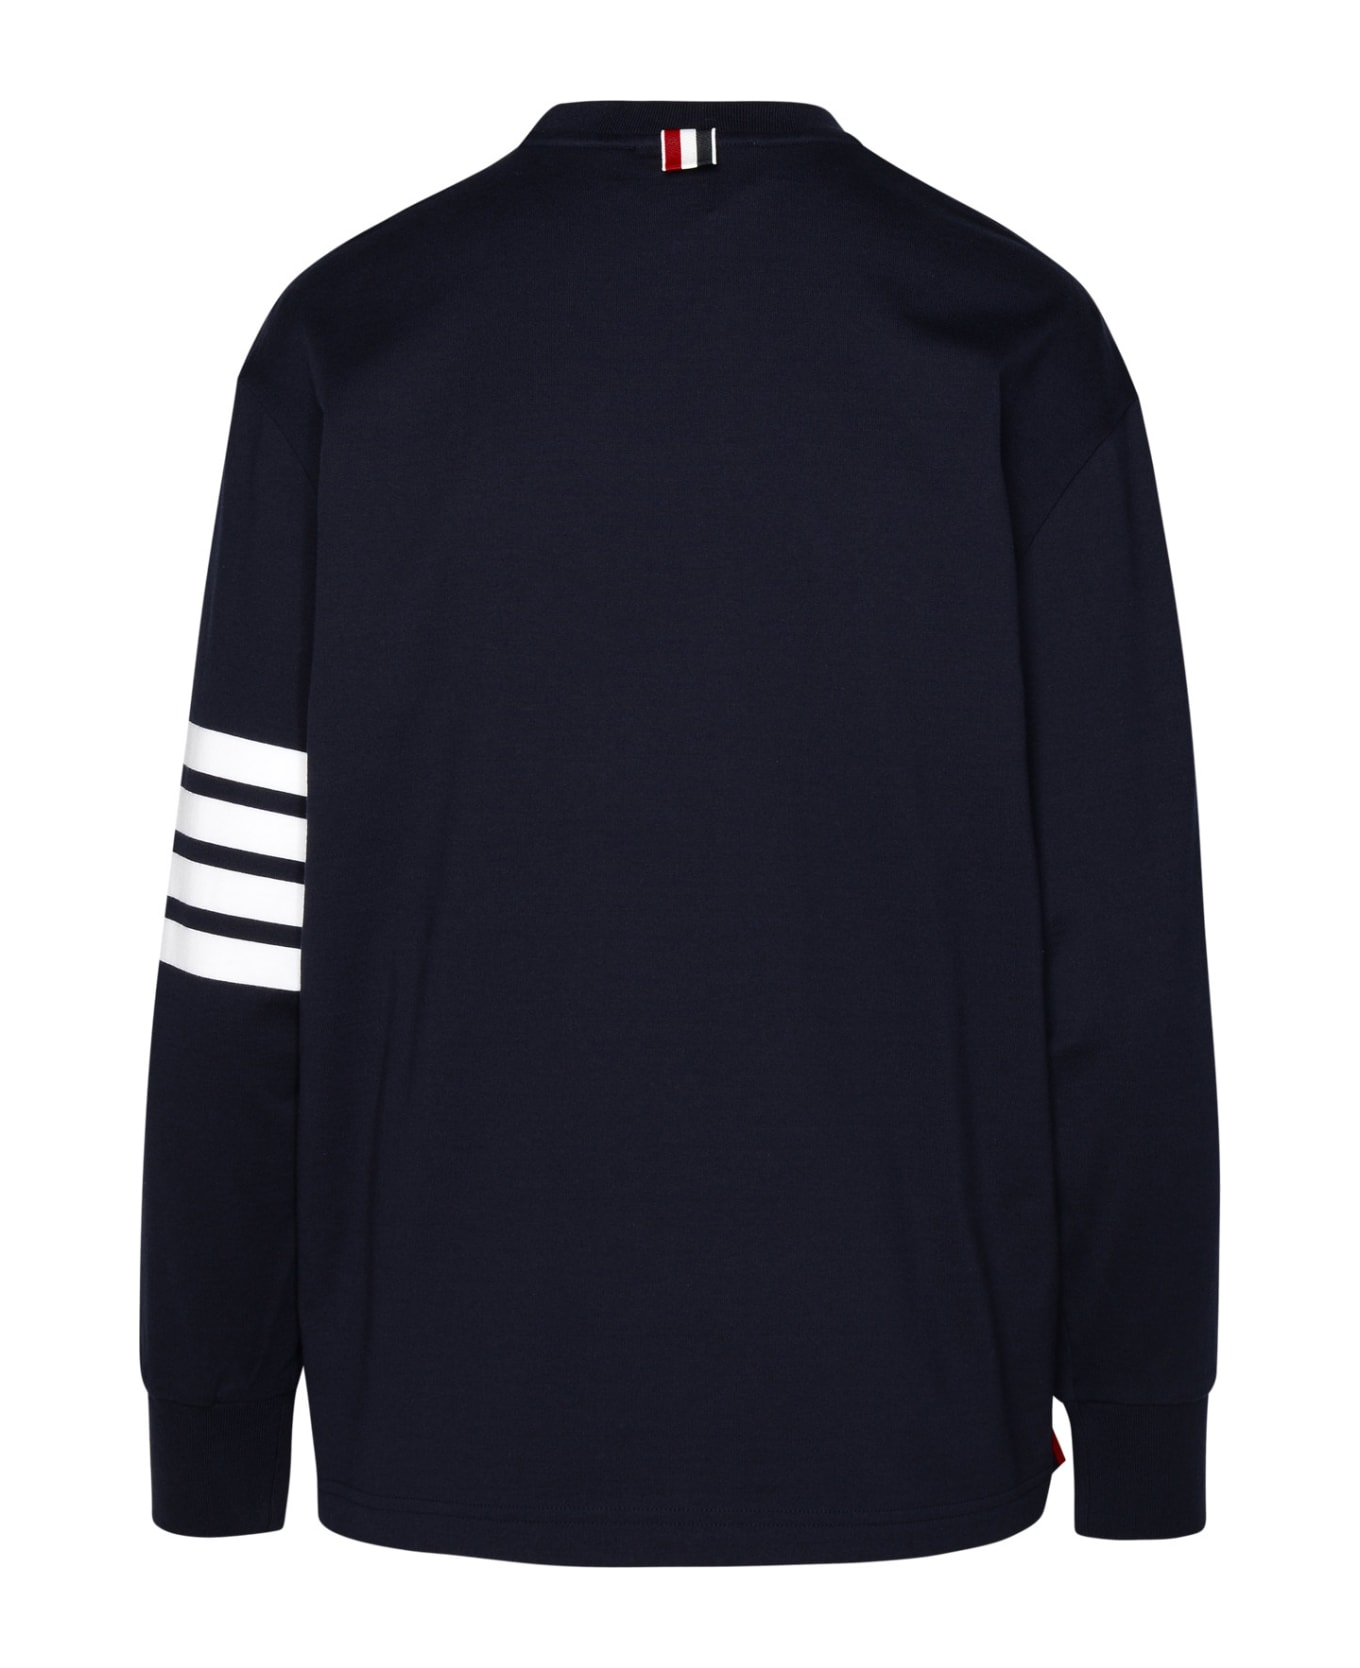 Thom Browne Navy Cotton Sweater - BLUE Tシャツ